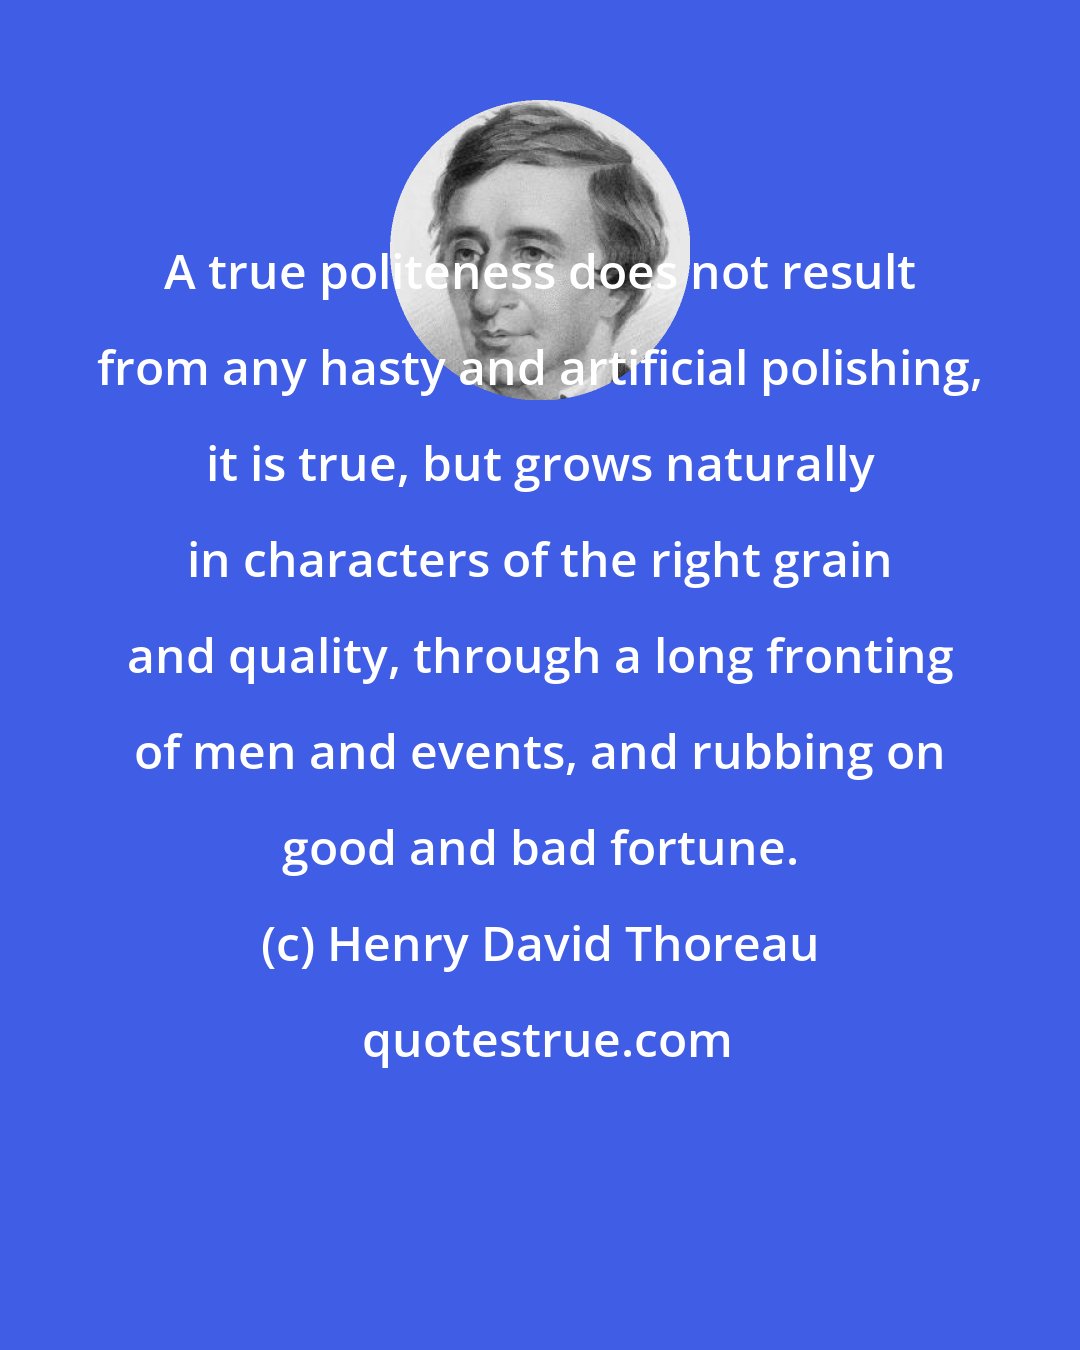 Henry David Thoreau: A true politeness does not result from any hasty and artificial polishing, it is true, but grows naturally in characters of the right grain and quality, through a long fronting of men and events, and rubbing on good and bad fortune.